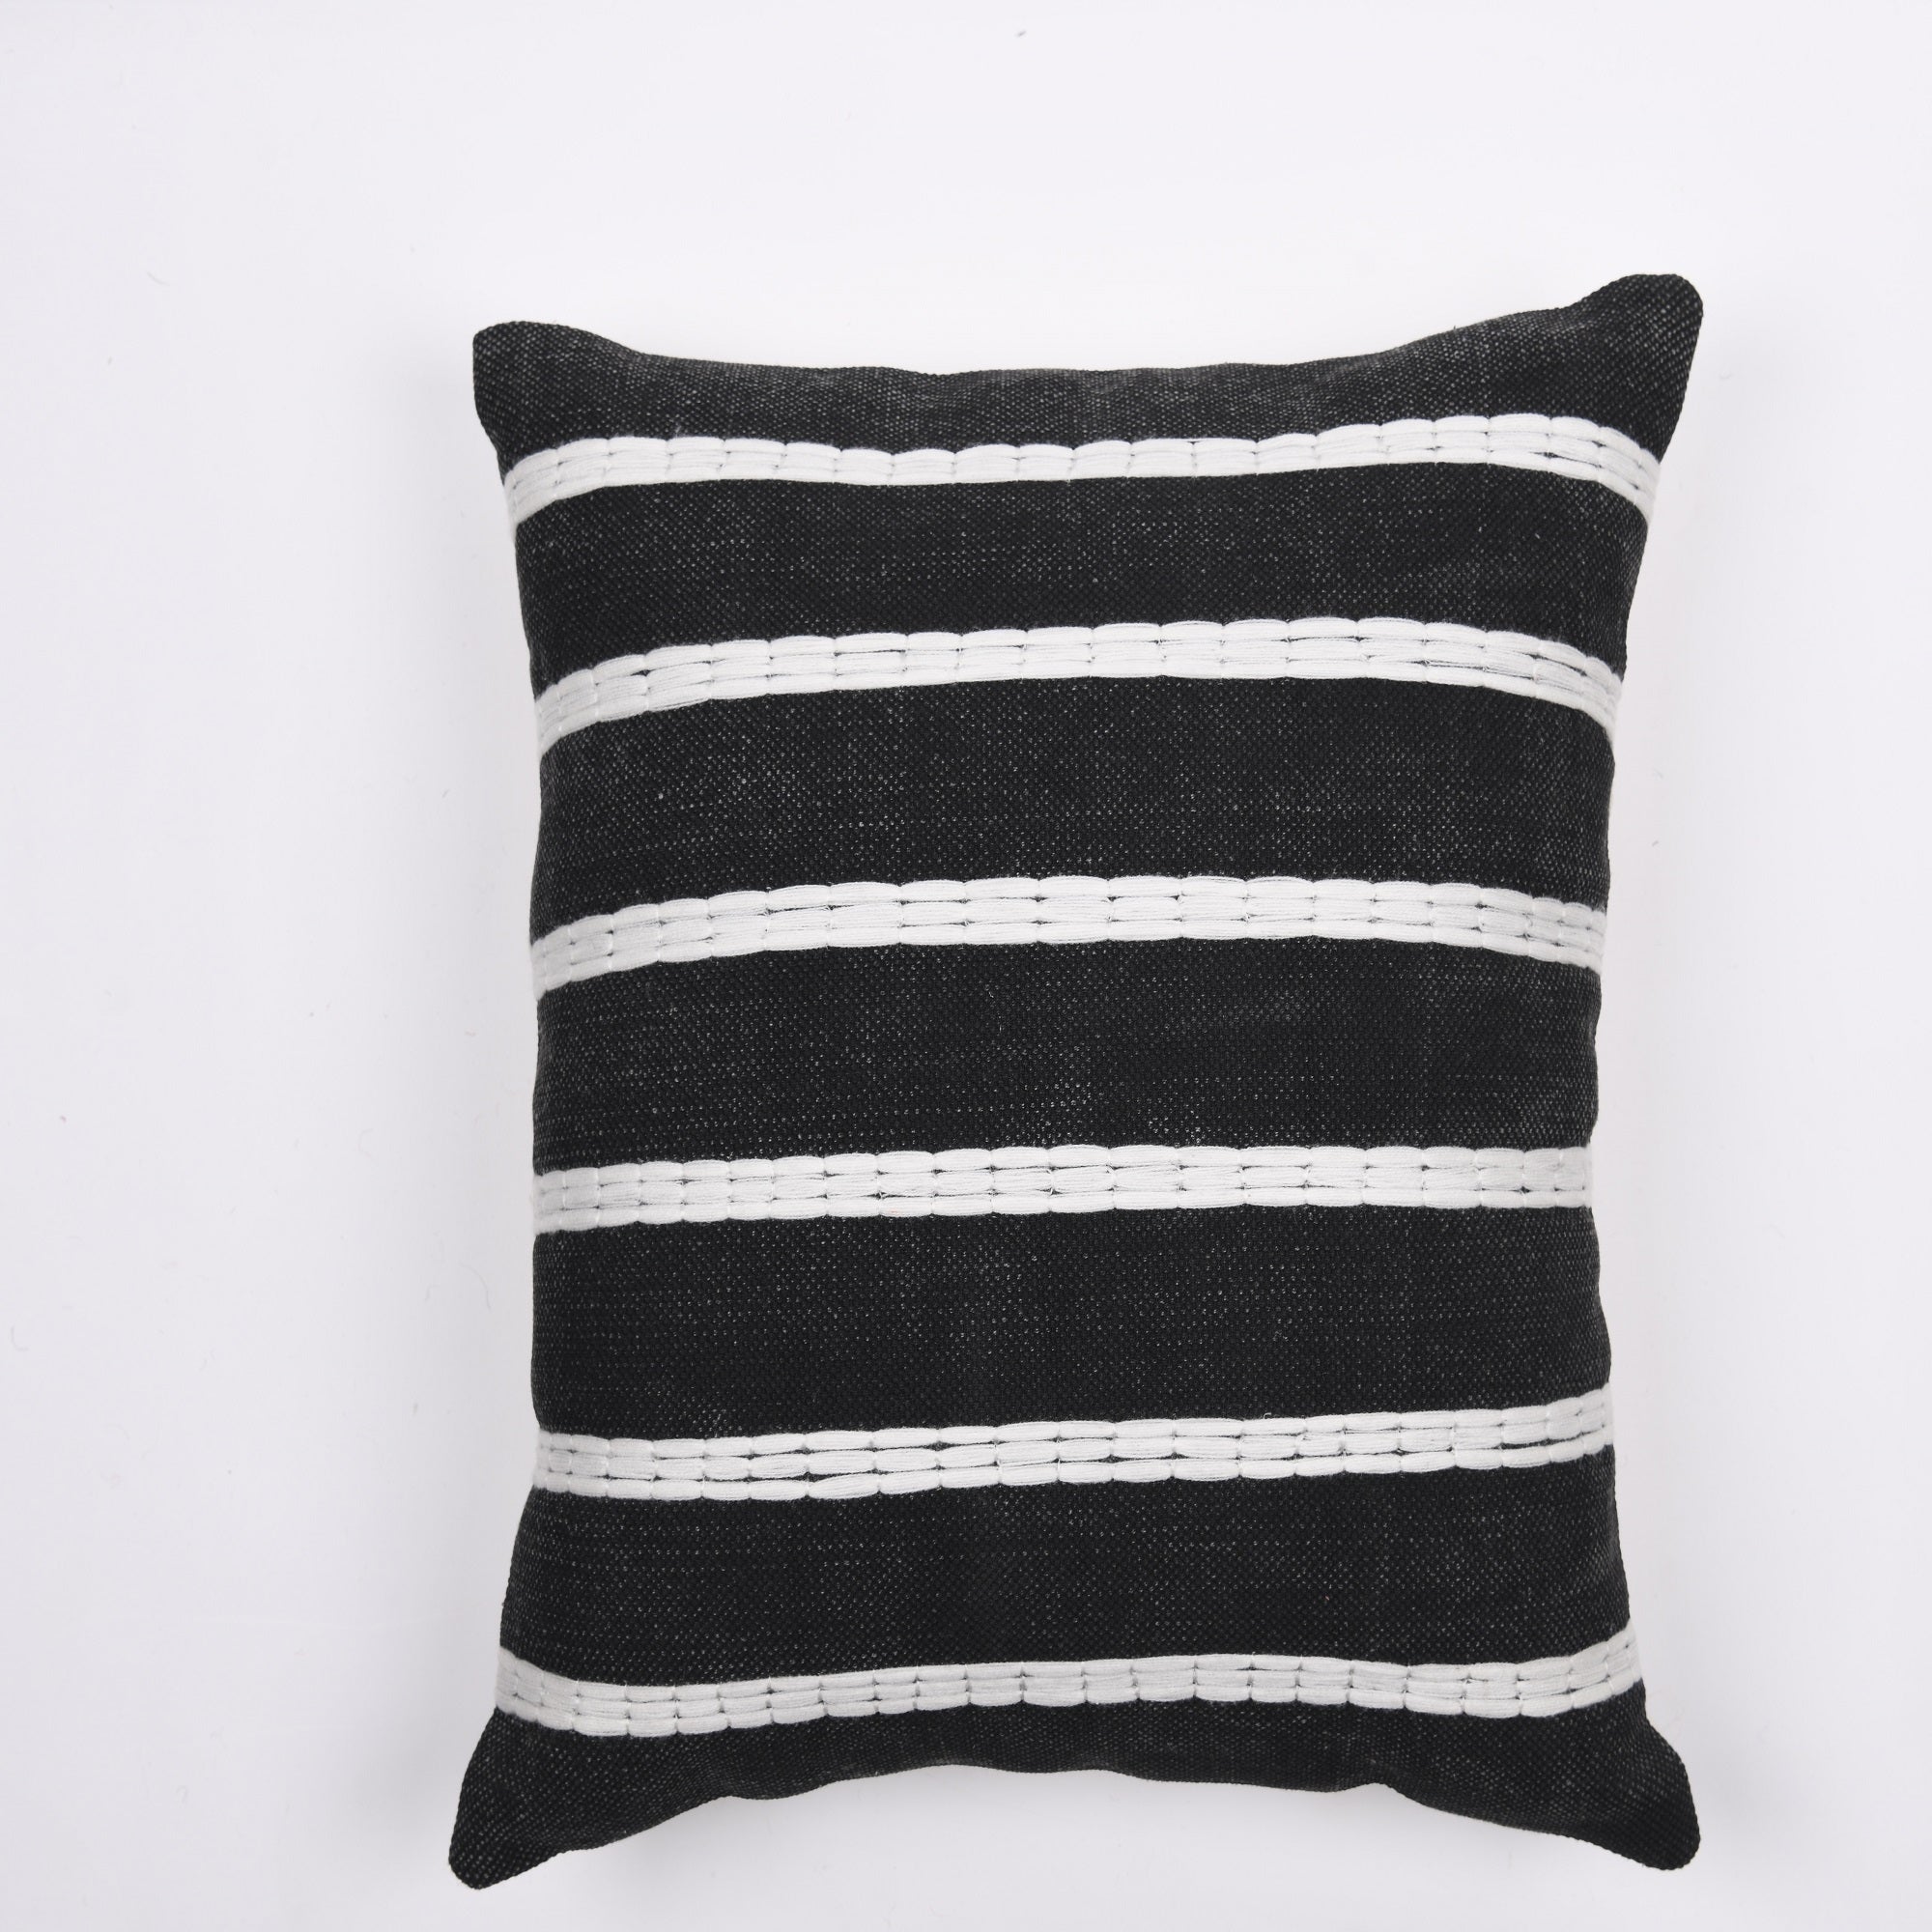 'Country Chic' Hand-Woven Cotton Wool Cushion Cover